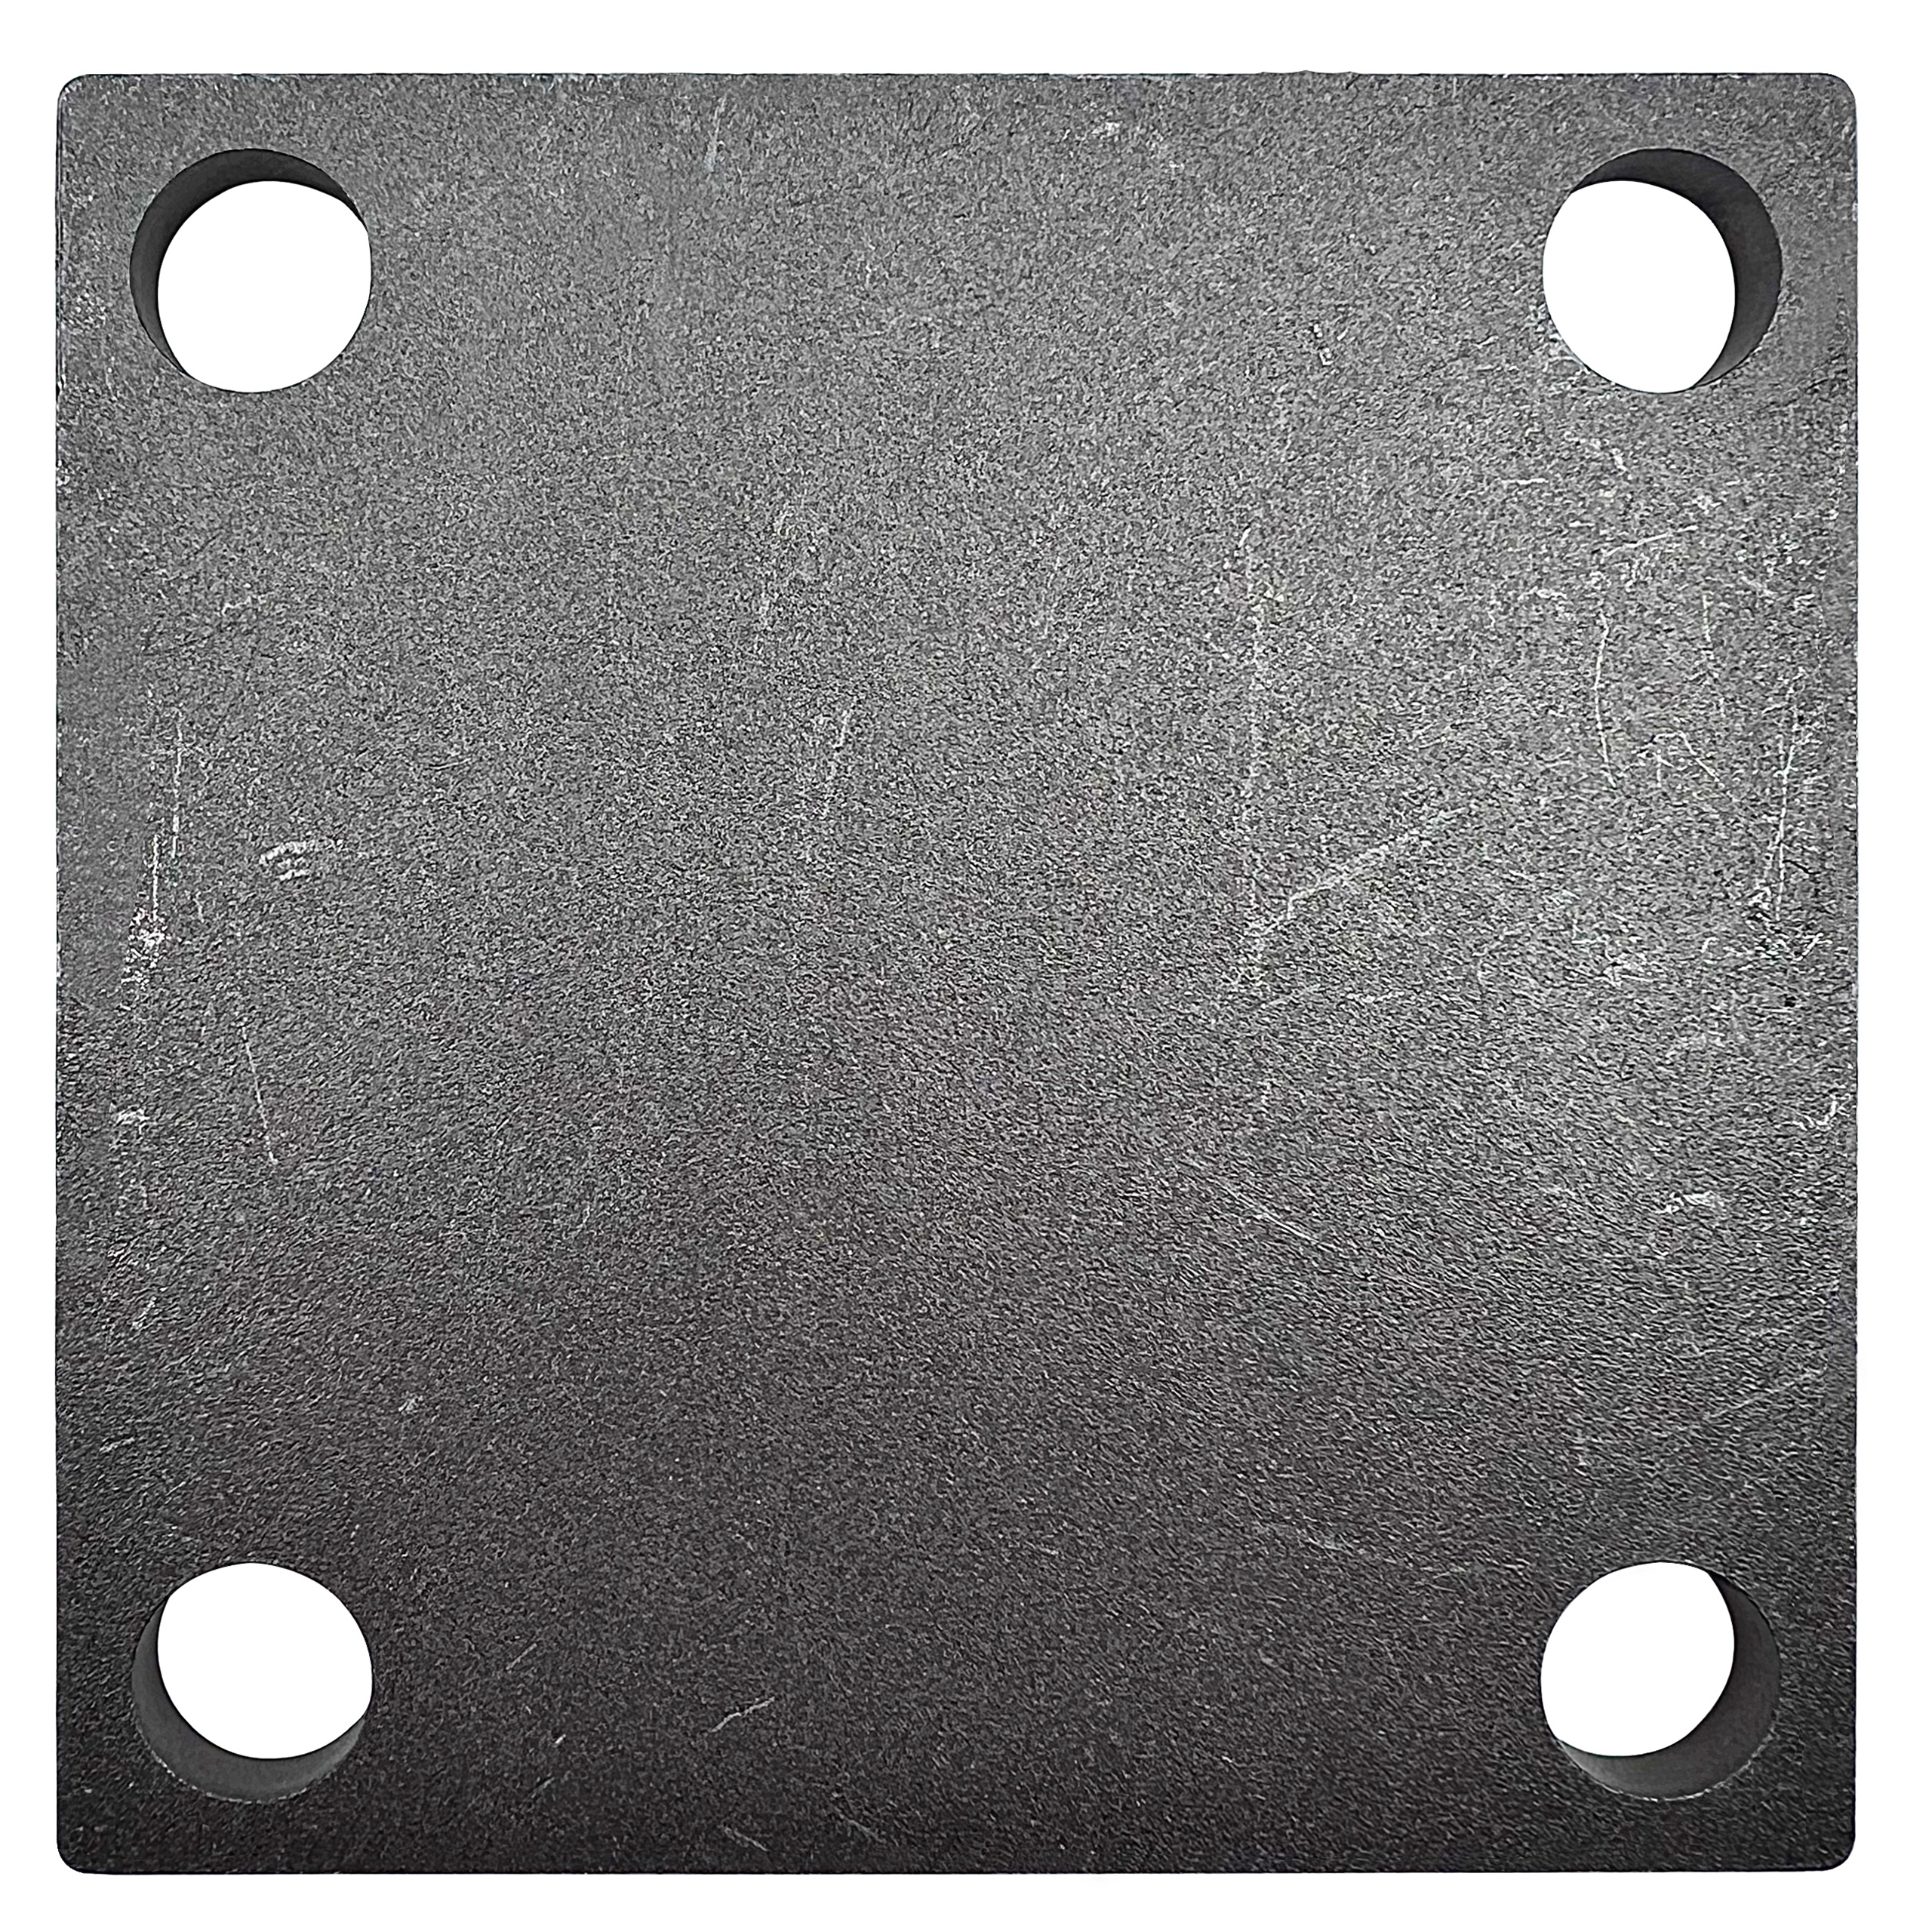 8x8" Weldable Square Steel Metal Baseplate – A36 Heavy Duty Carbon Steel